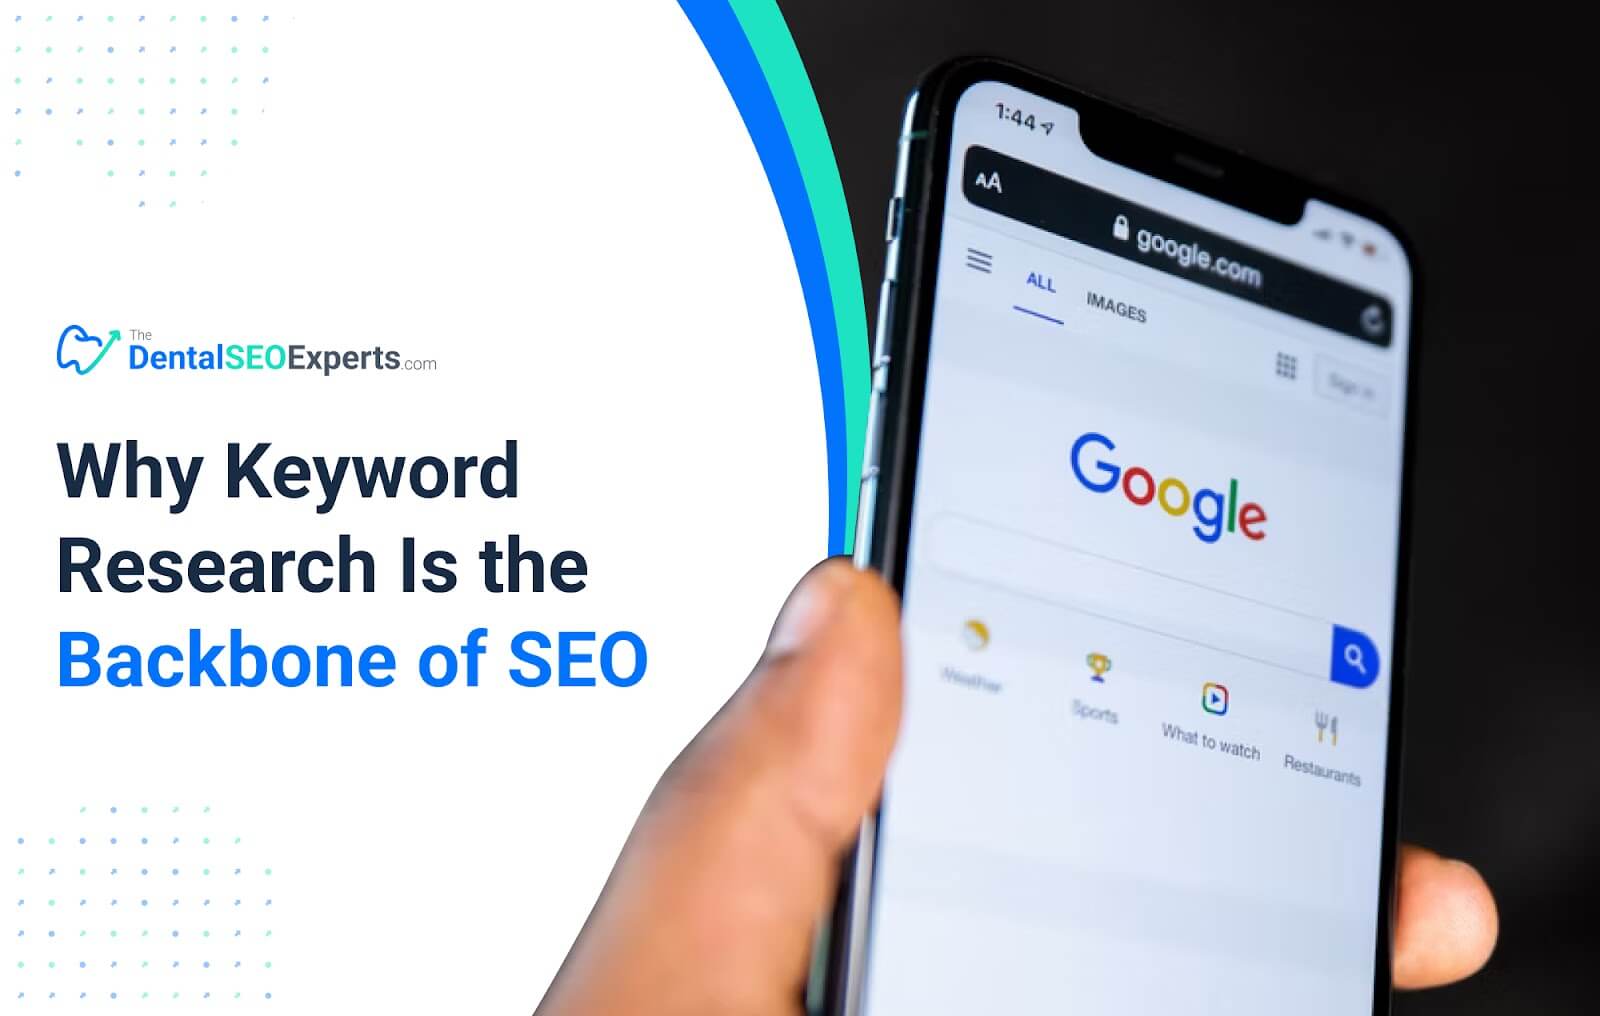 TheDentalSEOExperts - Why Keyword Research Is the Backbone of SEO